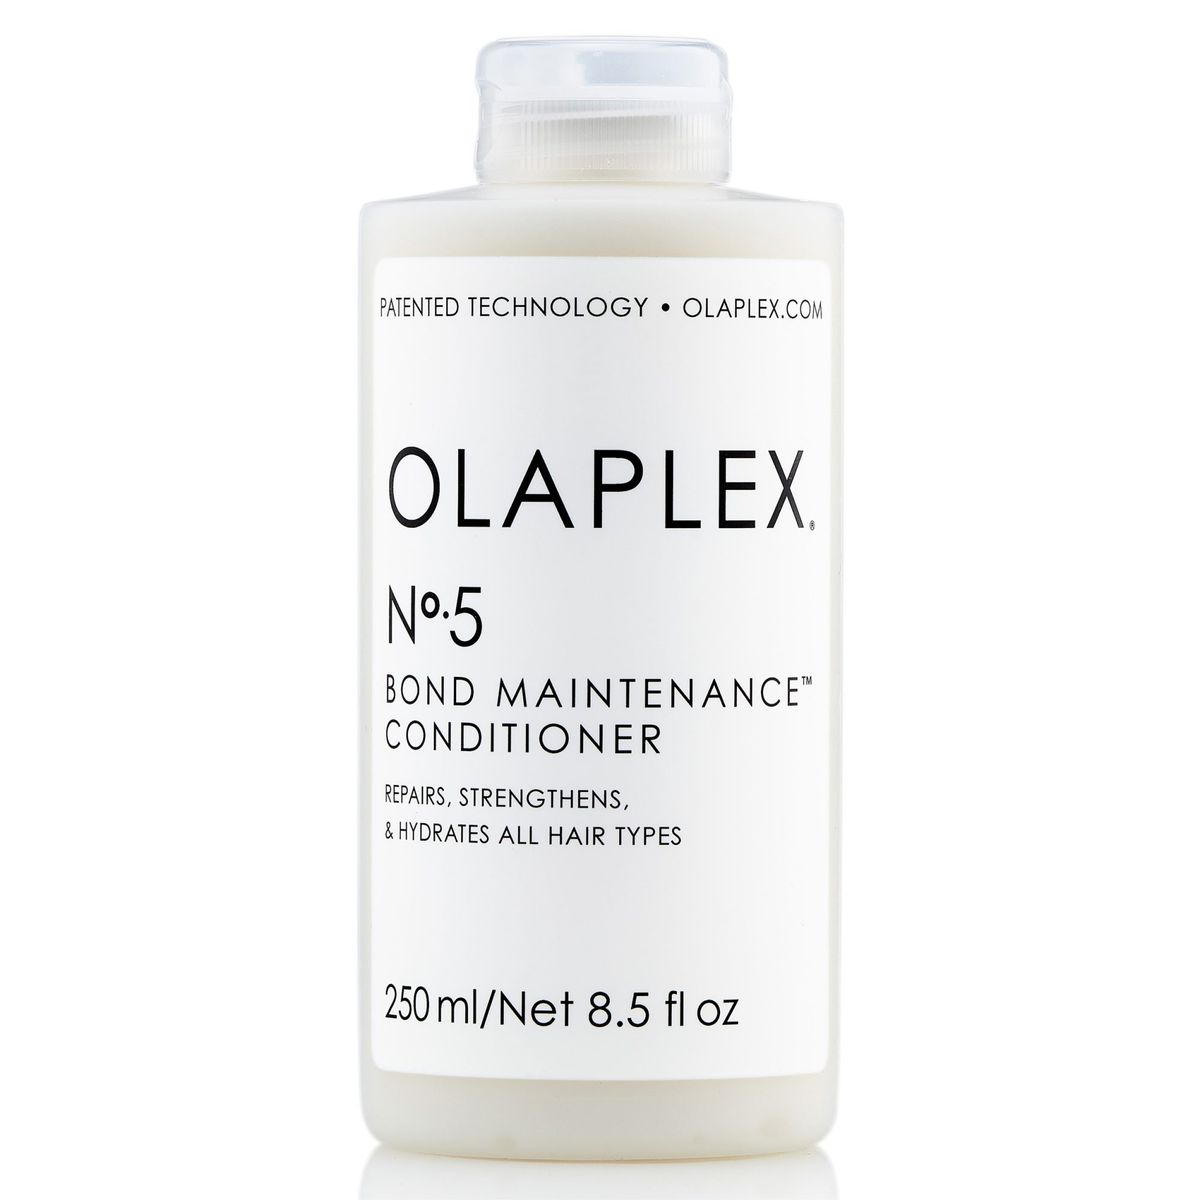 Olaplex 4 and 5 have saved my hair after constant bleaching, and it’s absolutely worth the hype